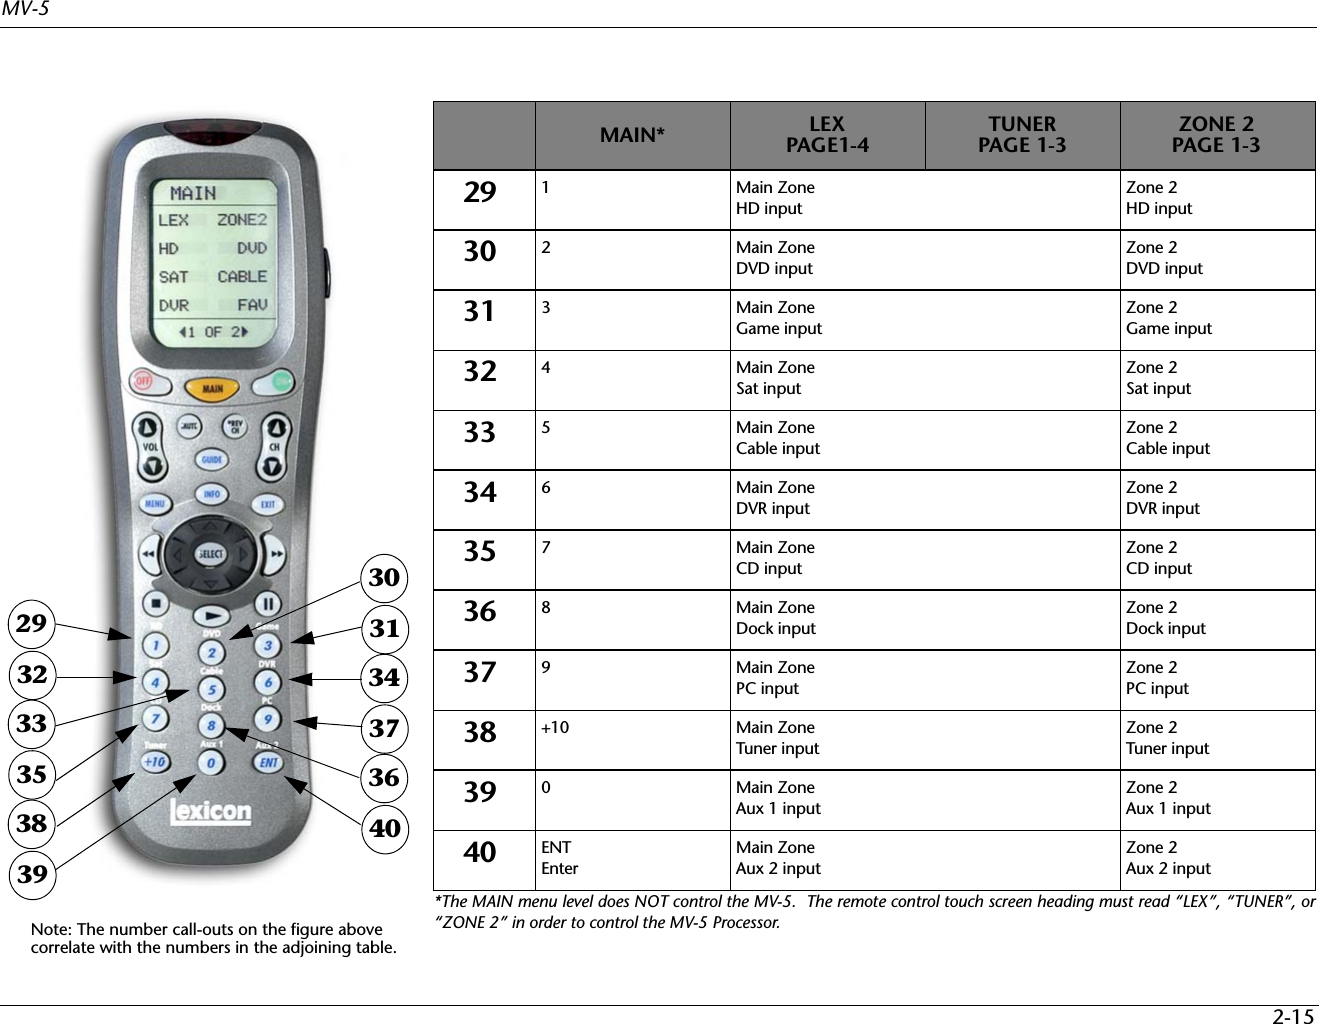 MV-52-15*The MAIN menu level does NOT control the MV-5.  The remote control touch screen heading must read “LEX”, “TUNER”, or“ZONE 2” in order to control the MV-5 Processor.Note: The number call-outs on the figure abovecorrelate with the numbers in the adjoining table.393835333229403637343130 MAIN* LEX PAGE1-4TUNERPAGE 1-3ZONE 2 PAGE 1-329 1Main ZoneHD inputZone 2HD input30 2Main ZoneDVD inputZone 2DVD input31 3Main ZoneGame input Zone 2Game input 32 4Main ZoneSat inputZone 2Sat input33 5Main ZoneCable inputZone 2Cable input34 6Main ZoneDVR inputZone 2DVR input35 7Main ZoneCD inputZone 2CD input36 8Main ZoneDock inputZone 2Dock input37 9Main ZonePC inputZone 2PC input38 +10 Main ZoneTuner inputZone 2Tuner input39 0Main ZoneAux 1 inputZone 2Aux 1 input40 ENTEnterMain ZoneAux 2 inputZone 2Aux 2 input